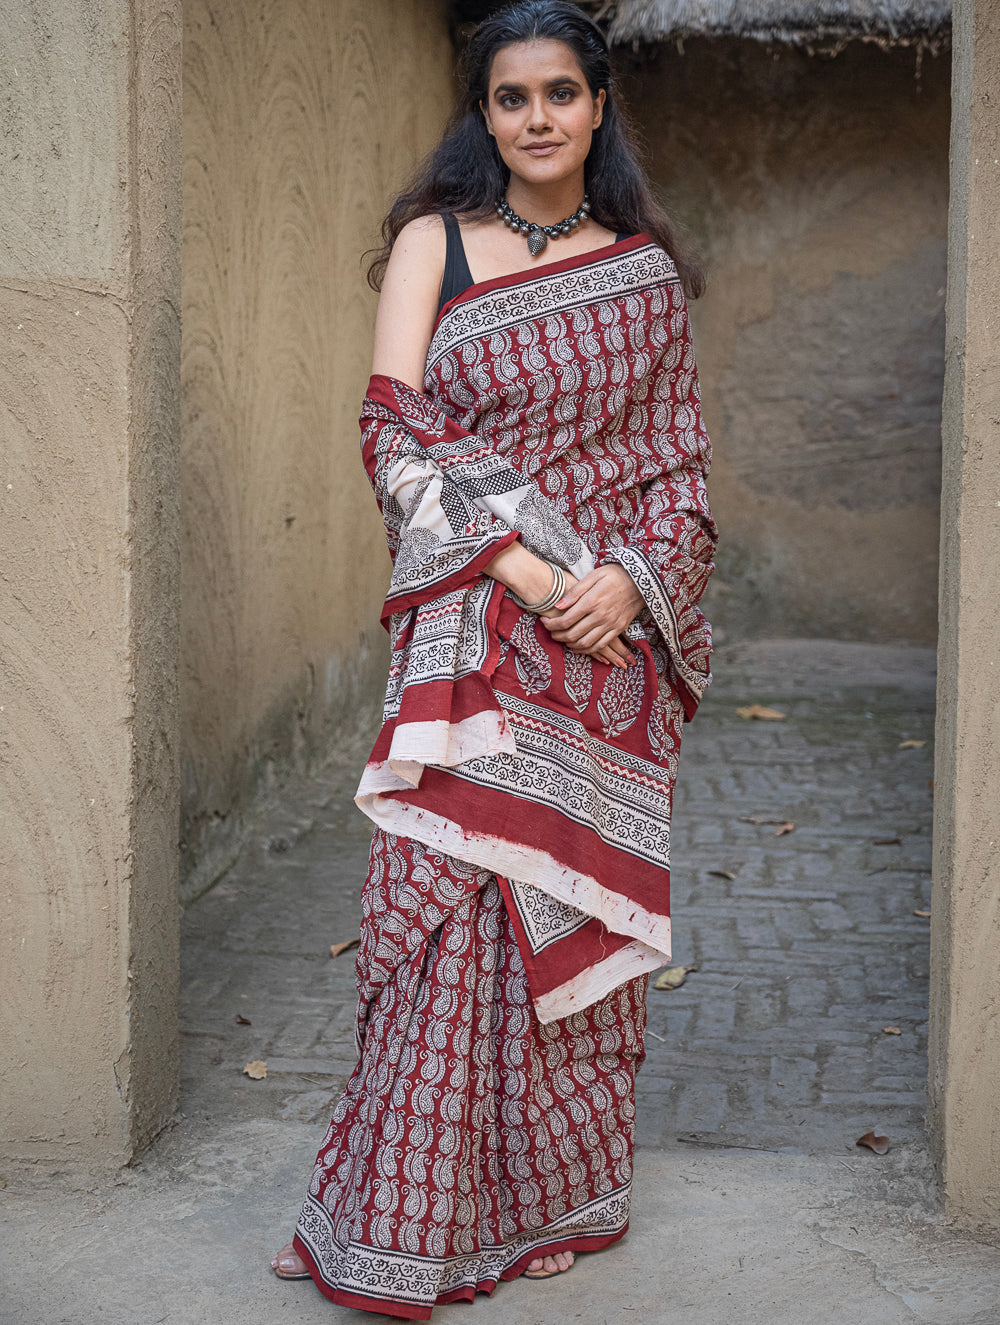 Load image into Gallery viewer, Exclusive Bagh Hand Block Printed Modal Silk Saree - Paisleys